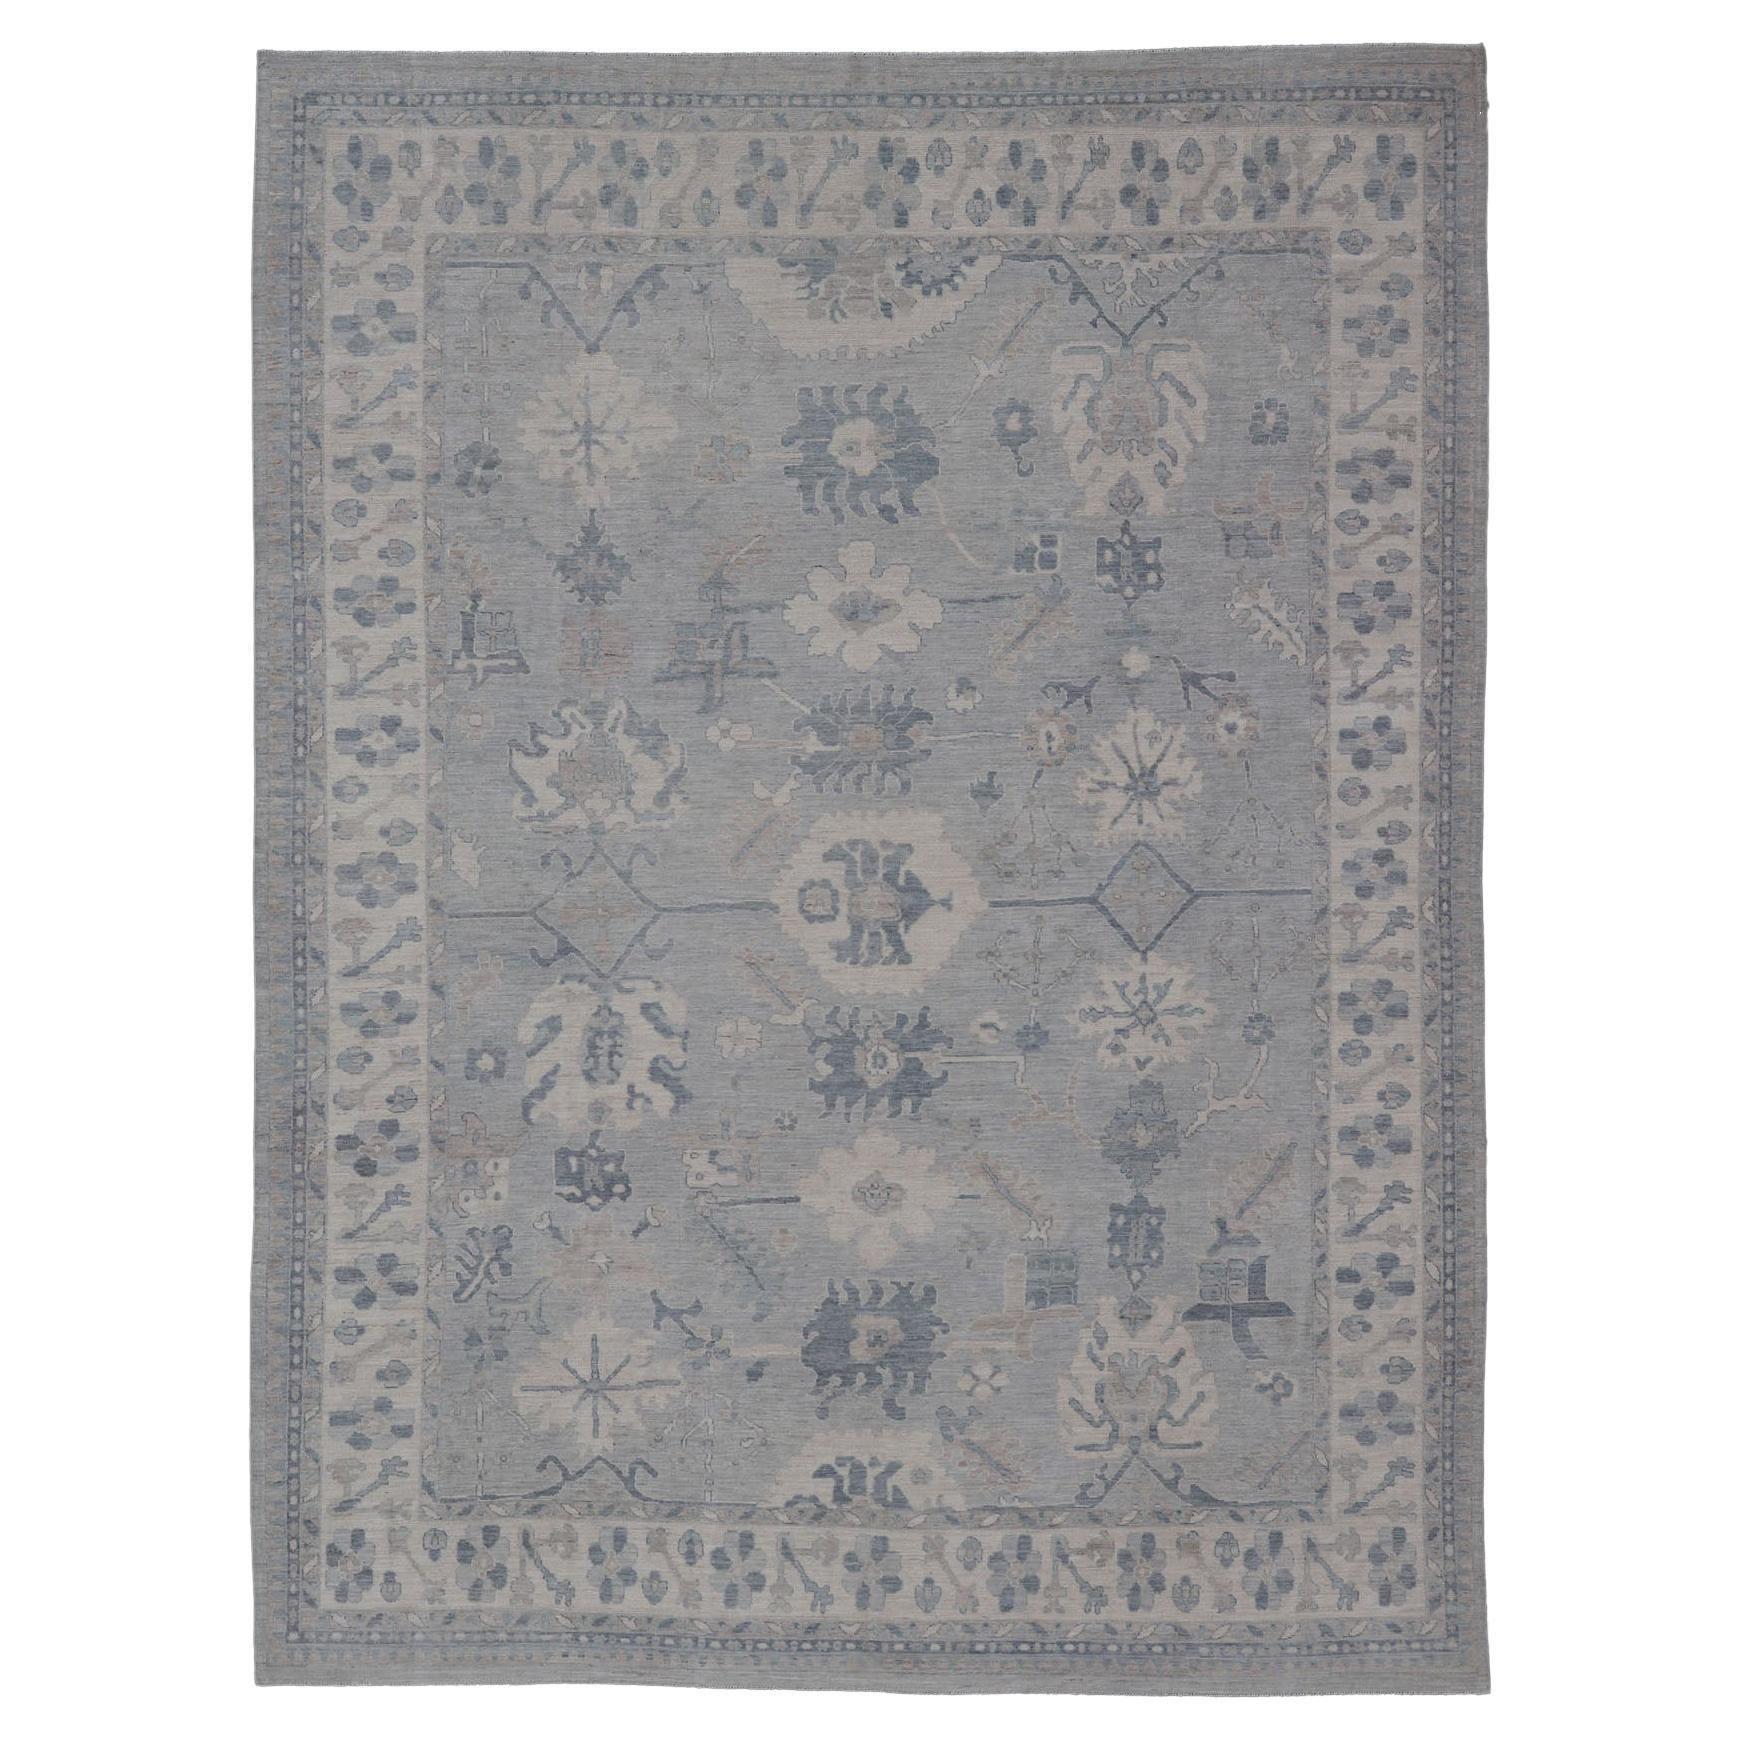 Large Modern Oushak with Floral Motifs with Cream, Grey, Blue, and Powder Blue